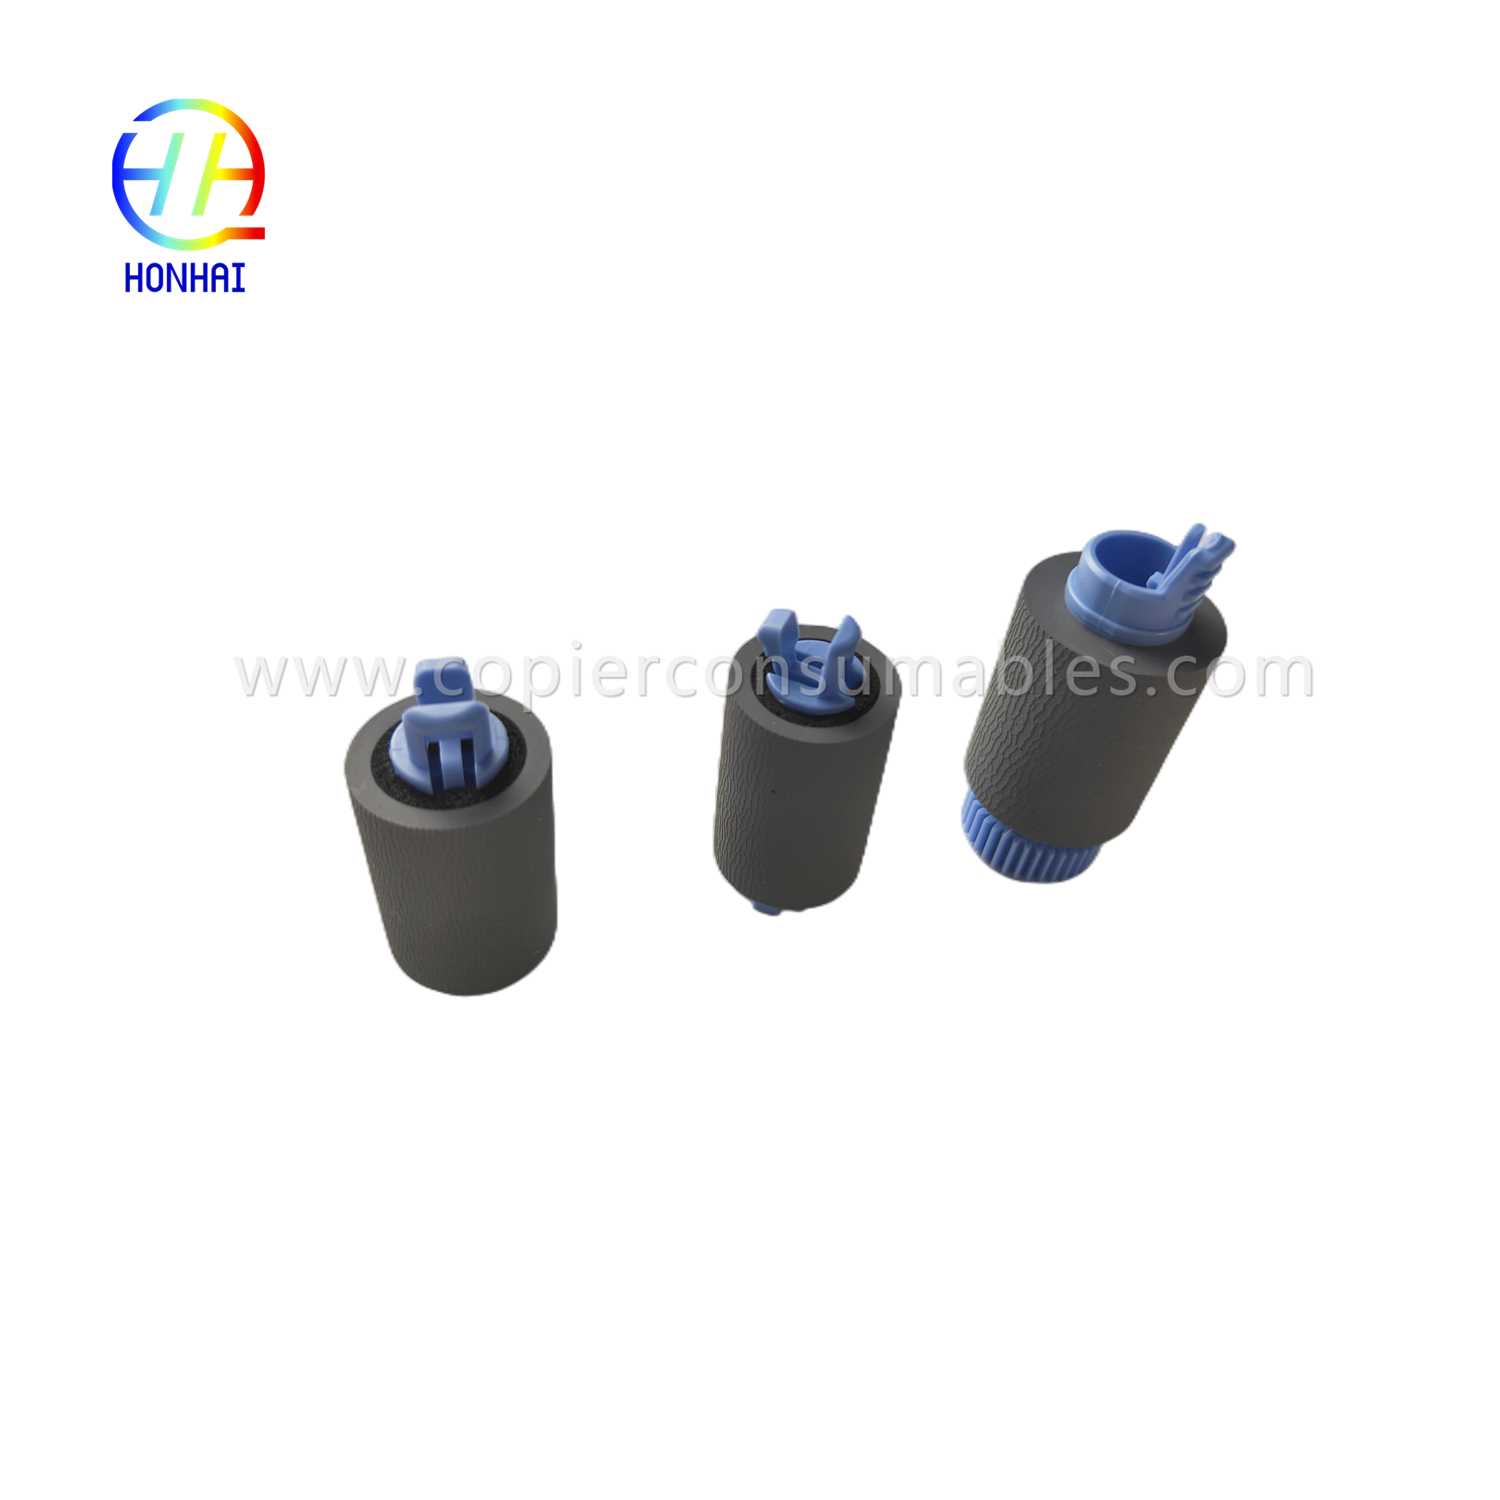 https://www.copierconsumables.com/tray-2-5-pickup-feed-separation-roller-set-for-hp-a7w93-67082-mfp-785f-780dn-e77650z-e77660z-e77650dn-e77660dn-p77740dn- p77750z-p77760z-p75050dn-p75050dw-prodotto/